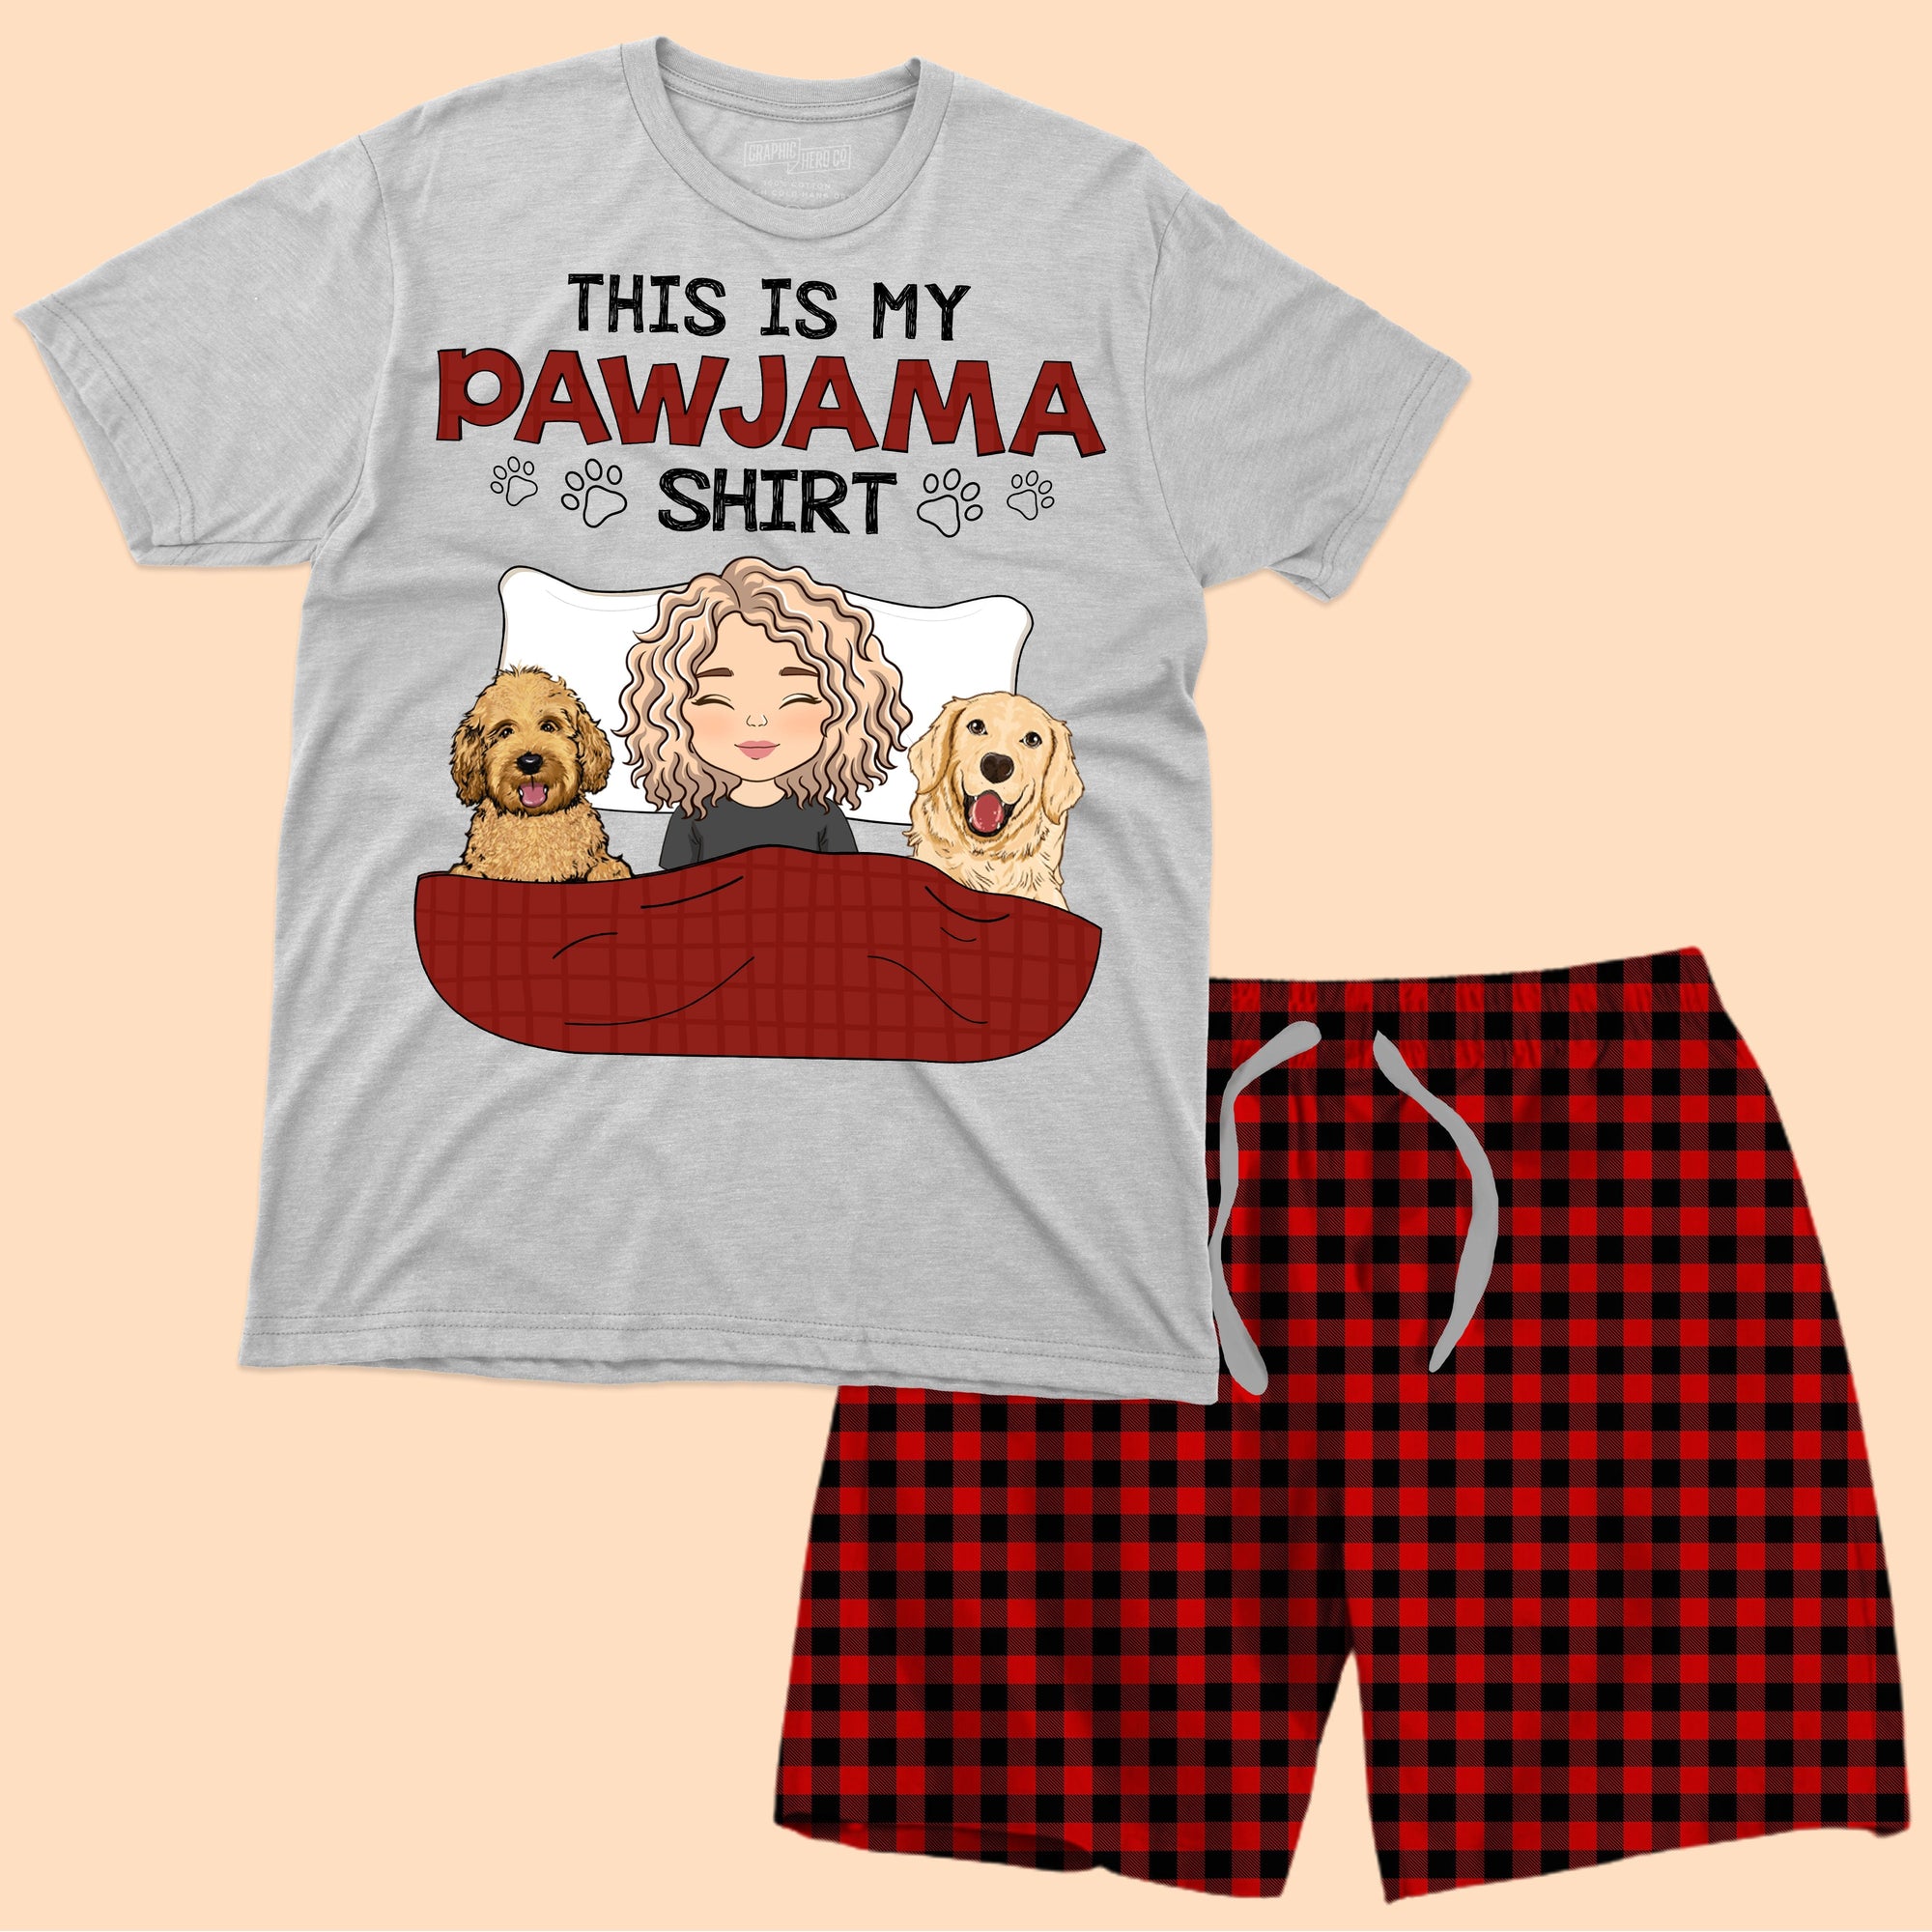 This My Pawjama Shirt - Custom Appearance And Name - Personalized Pajamas Short Pants